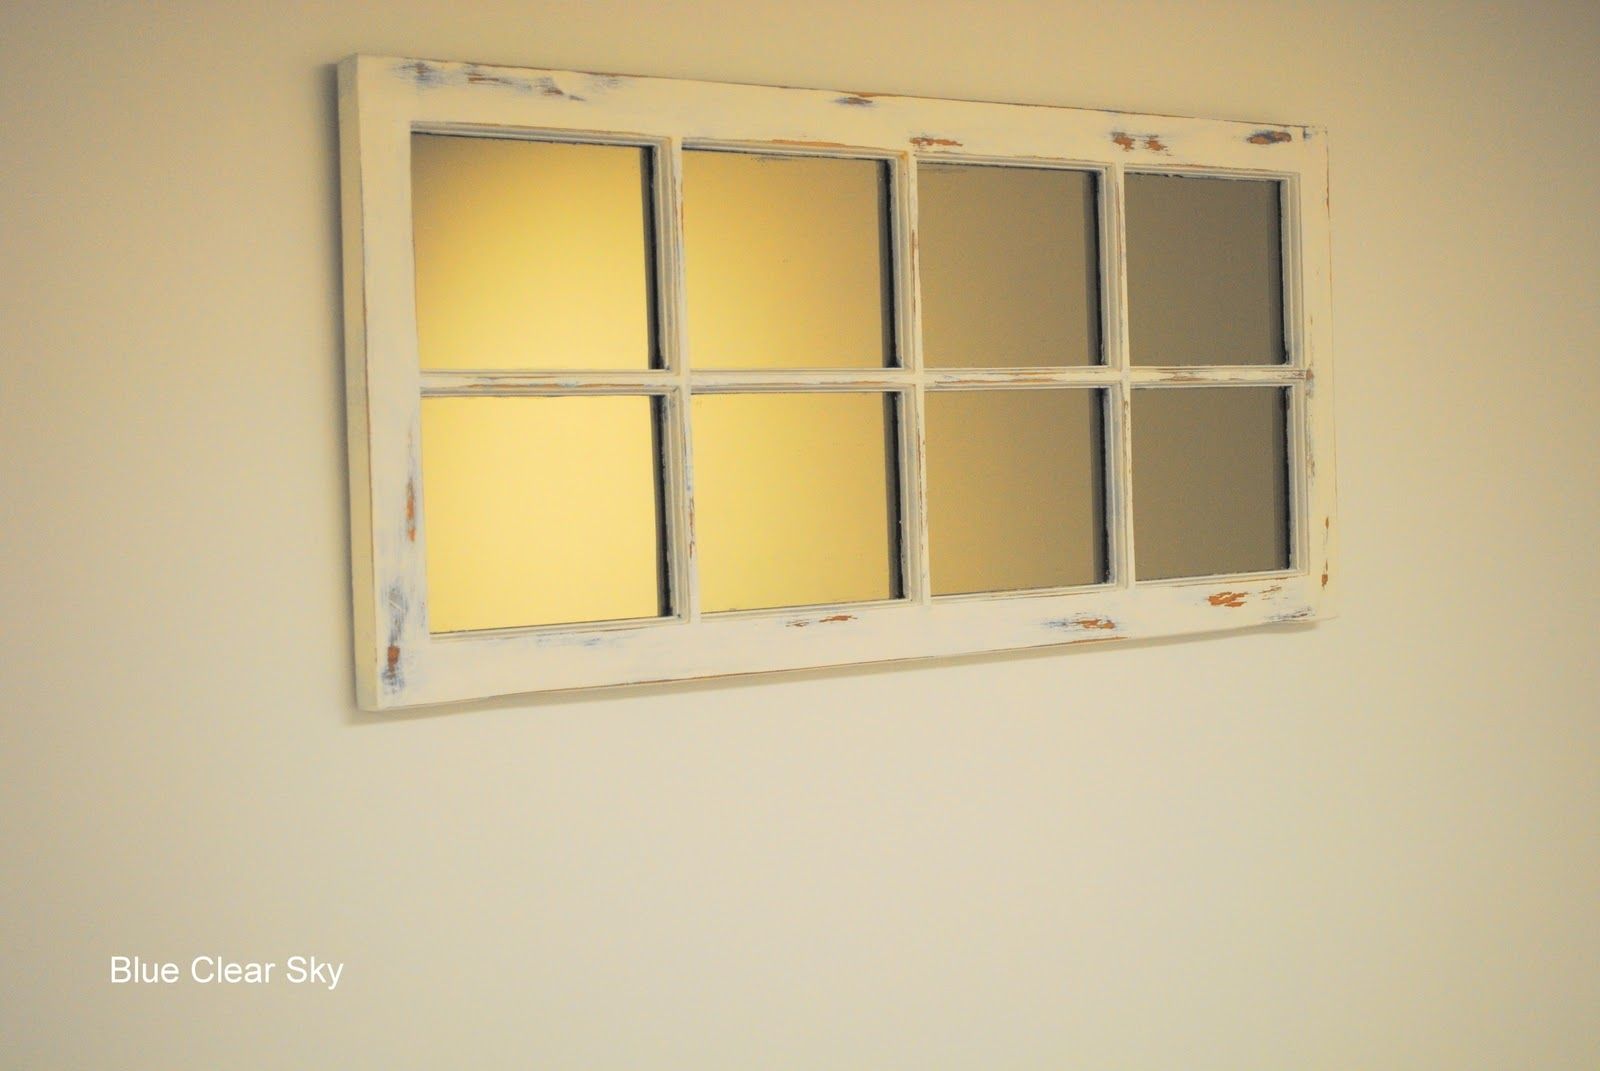 Rustic Maple Pine Window Frame Mirror Makeover Within Window Mirrors For Sale (View 4 of 15)